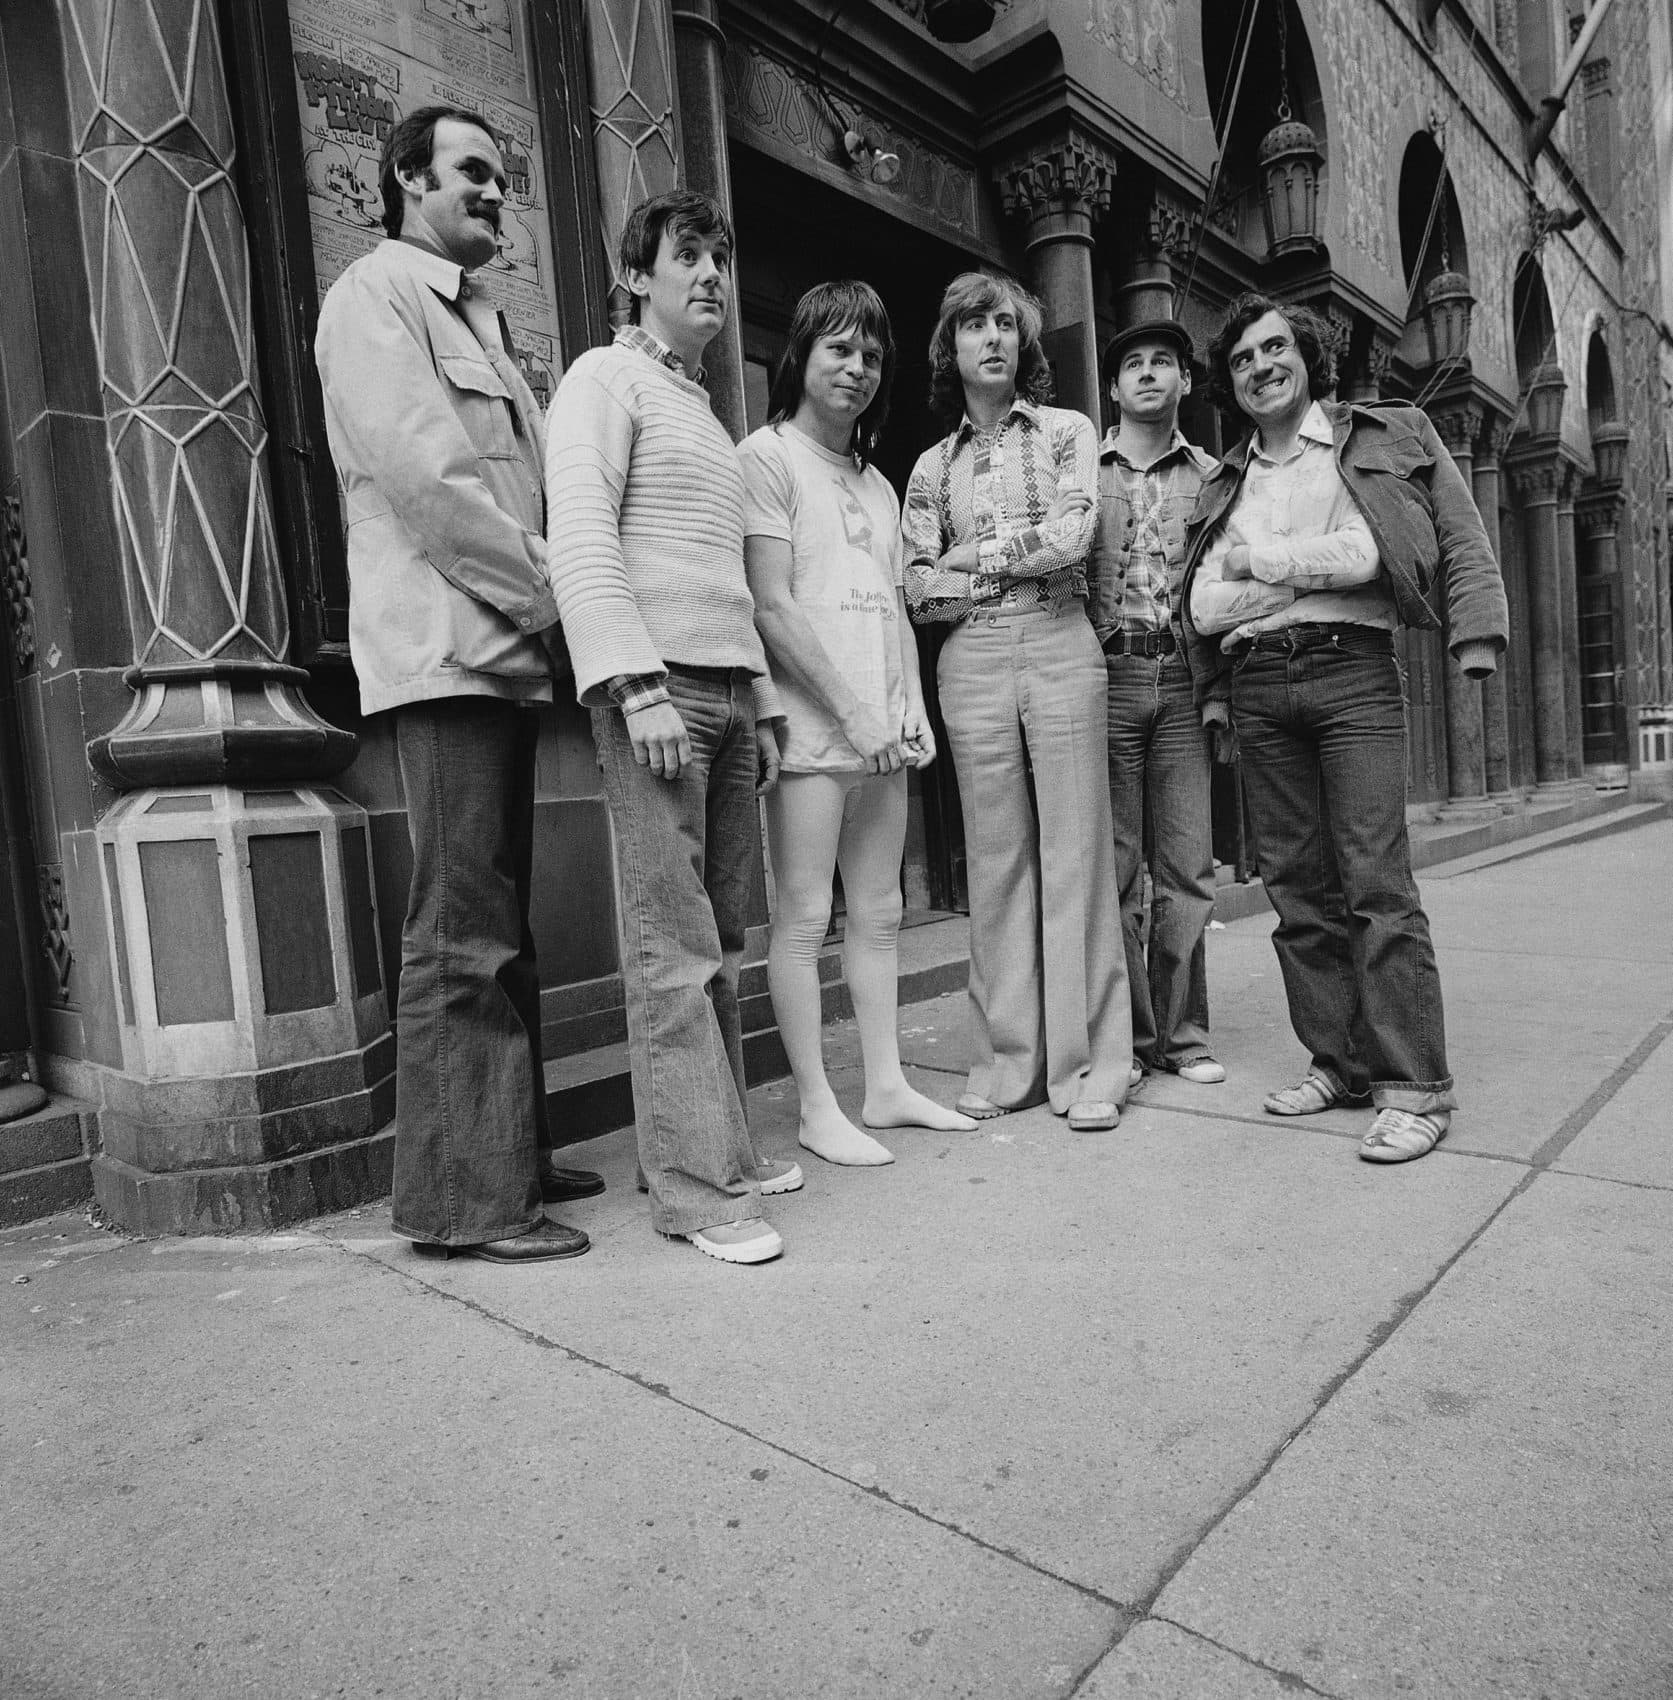 Monty Python members pose outside the City Center building in New York in 1976. From left to right: John Cleese, Michael Palin, Terry Gilliam, Eric Idle, Graham, Chapman, Terry Jones. (Suzanne Vlamis/AP)